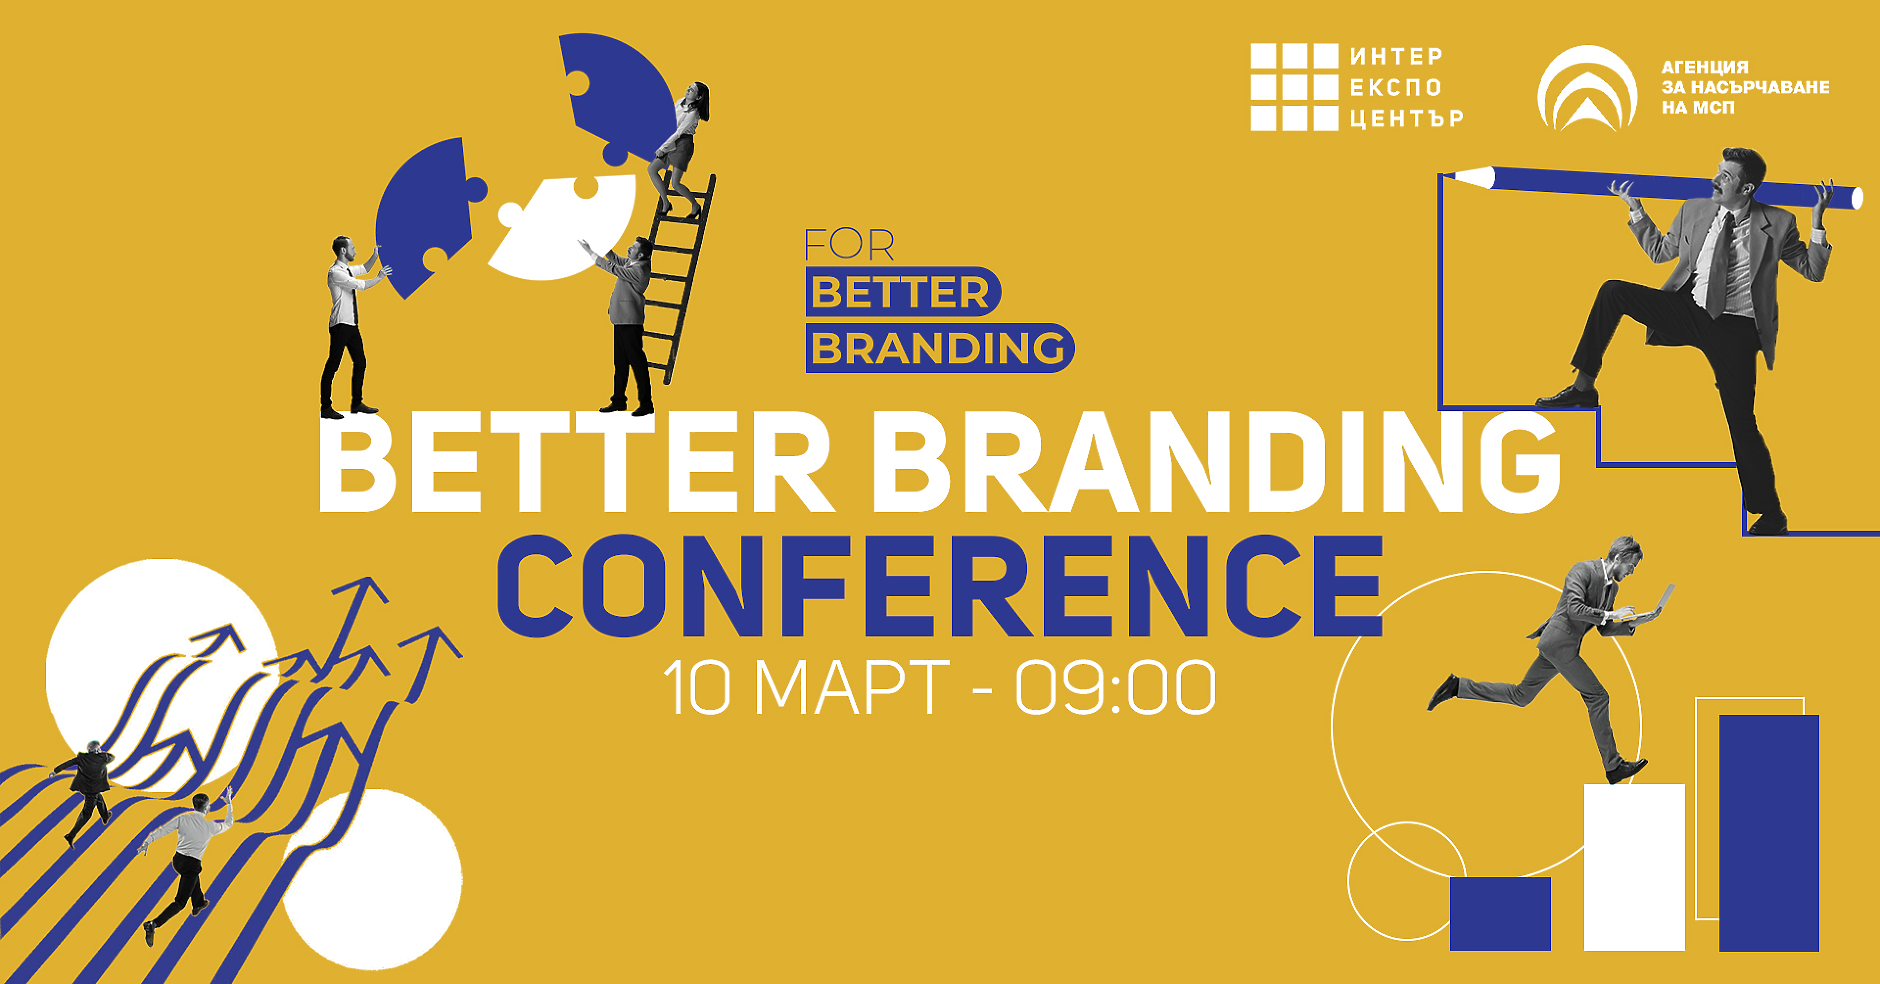 For Better Branding Conference предстои през март